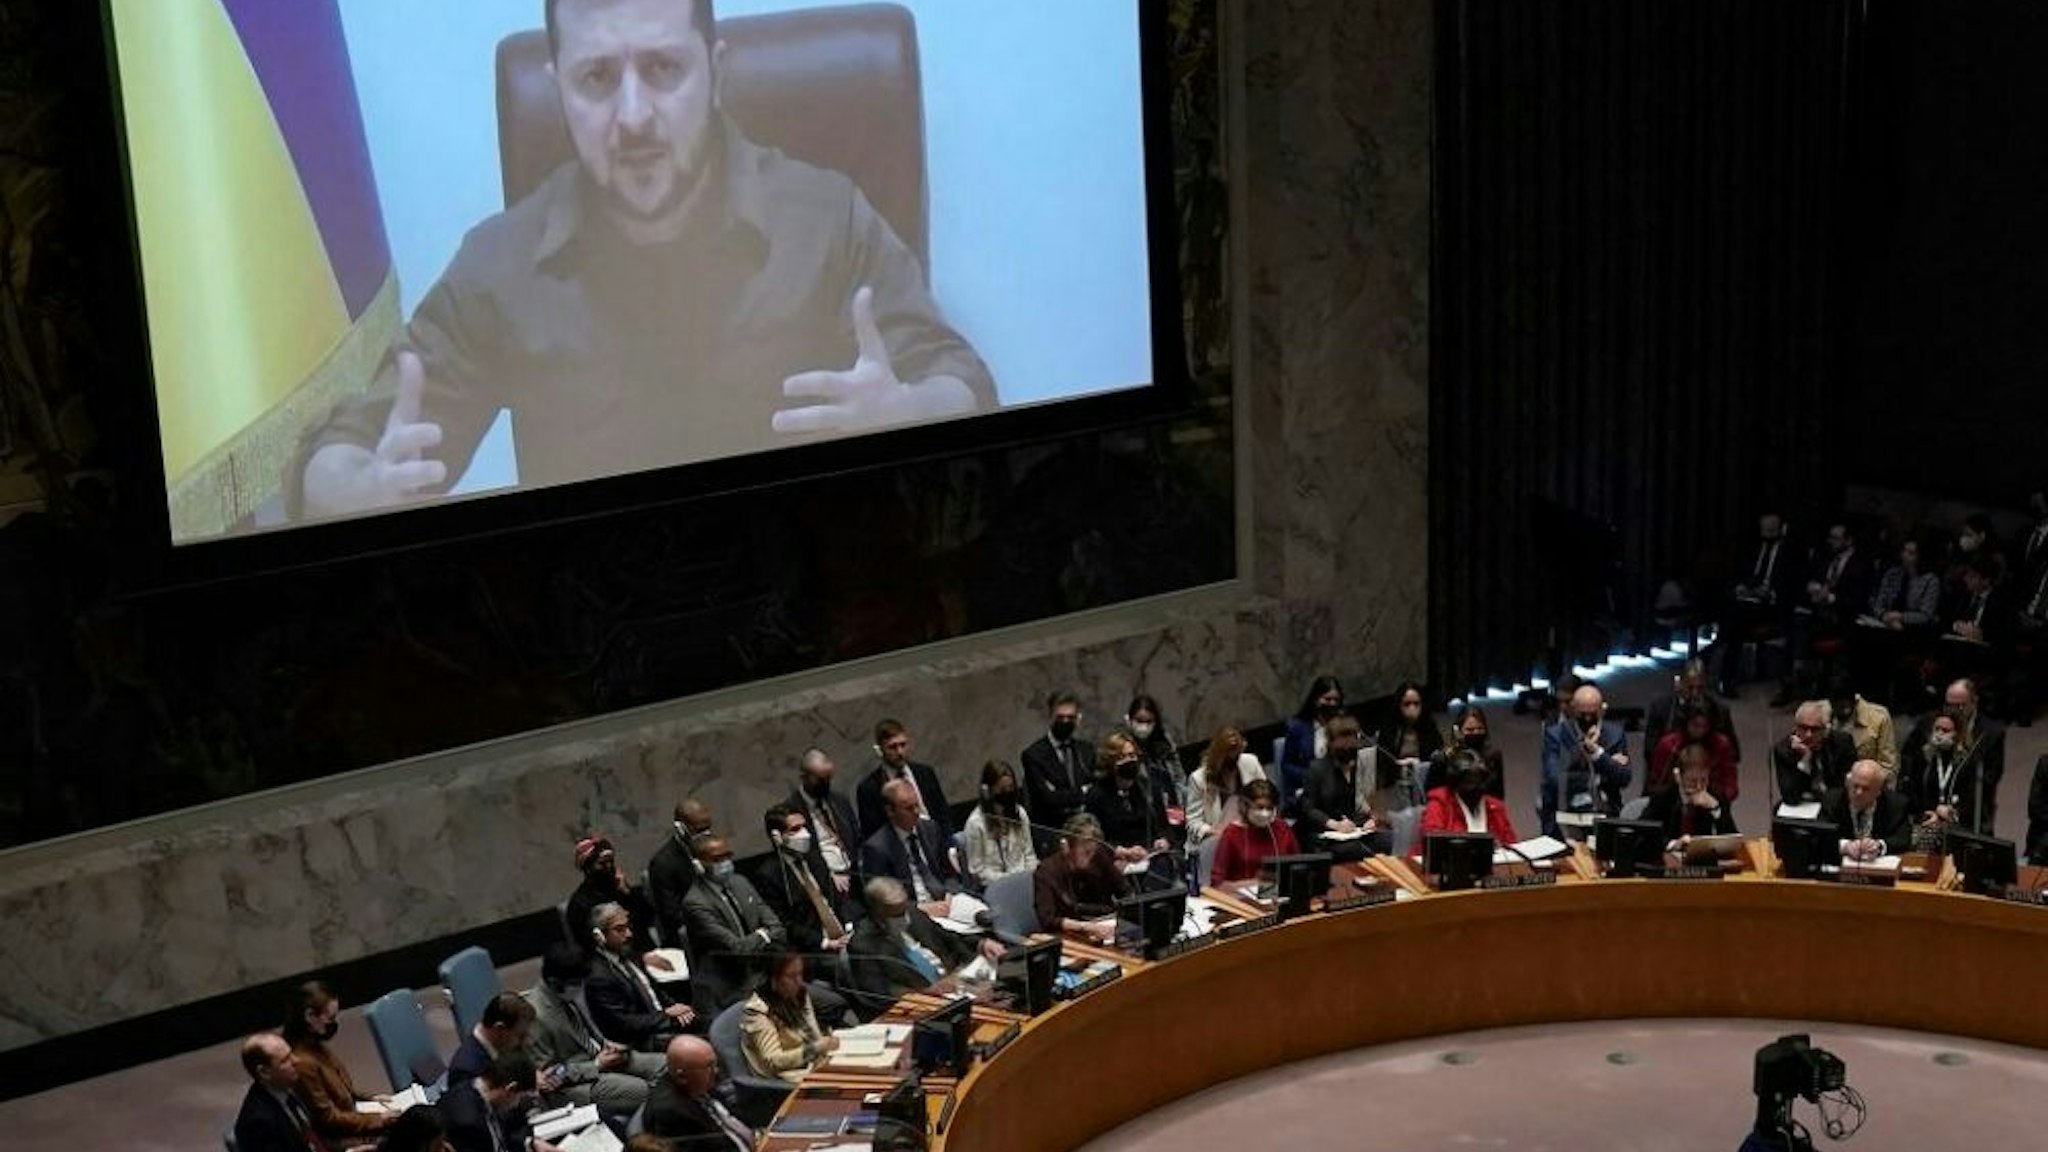 President Volodymyr Zelensky, of Ukraine, addresses a meeting of the United Nations Security Council in New York City on April 5, 2022. - Zelensky challenged the United Nations to "act immediately" or "dissolve yourself altogether" during a blistering address in which he showed a harrowing video of dead bodies -- including children -- he said were victims of Russian atrocities.